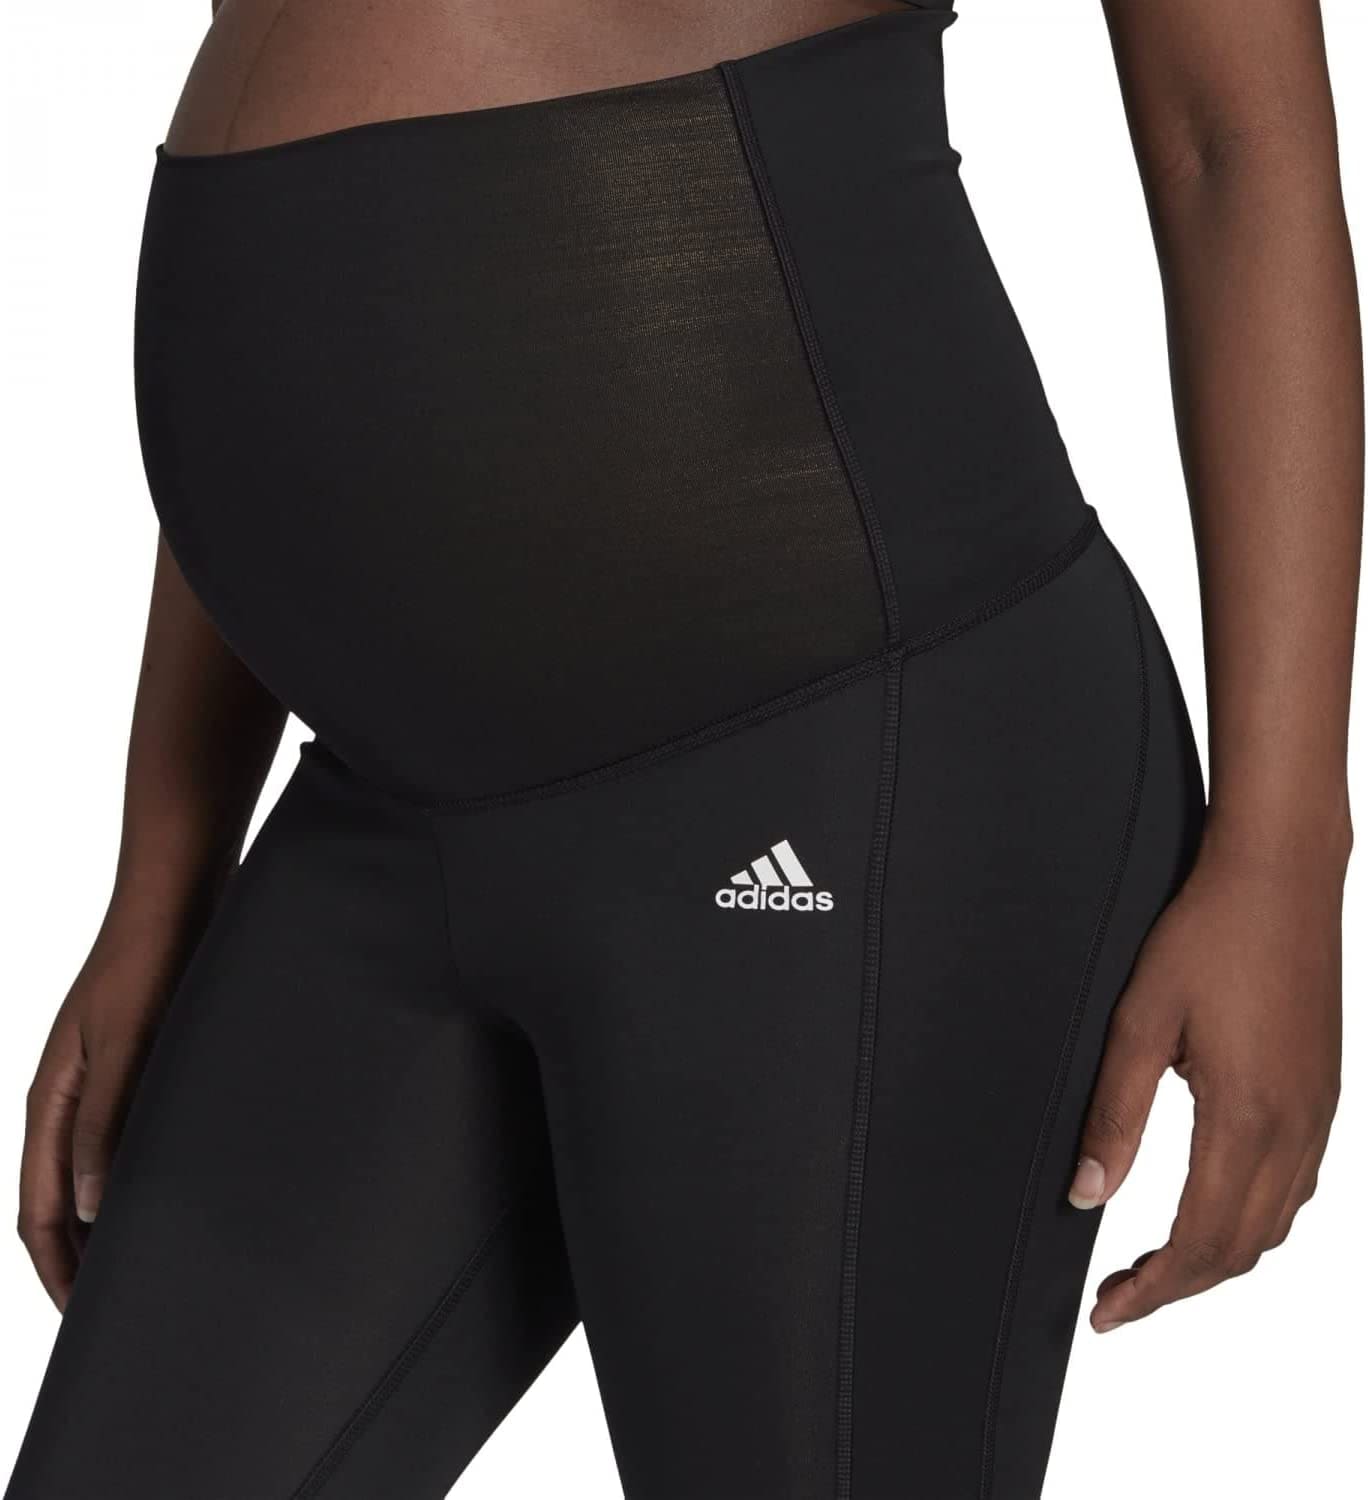 Adidas Designed to Move 7 8 Sport Tights (Maternity)